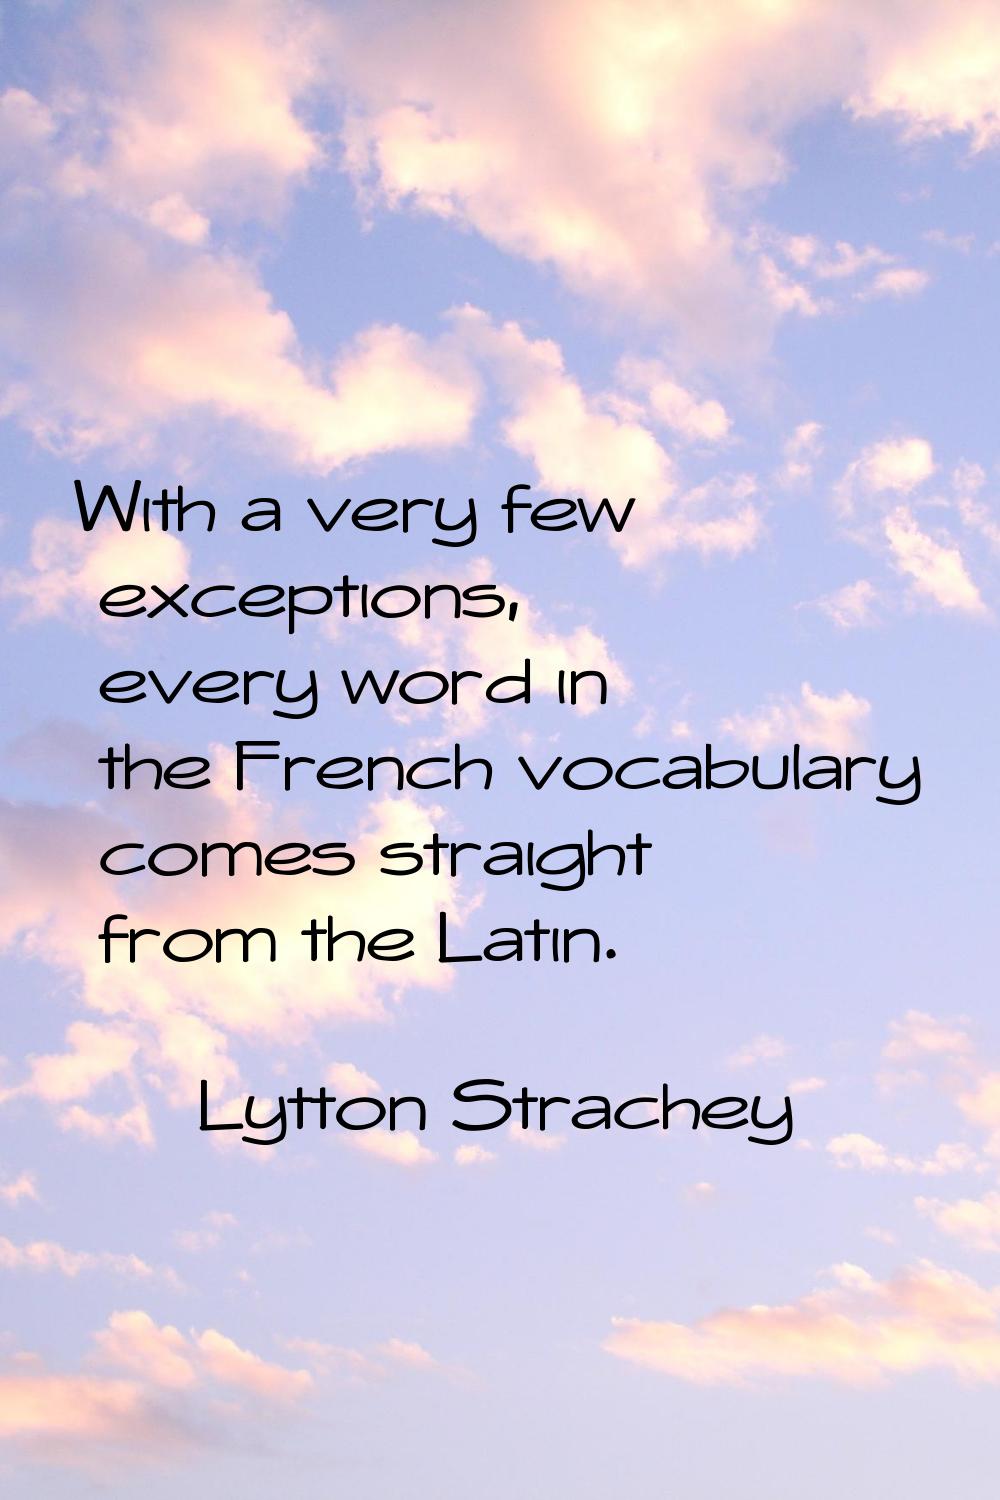 With a very few exceptions, every word in the French vocabulary comes straight from the Latin.